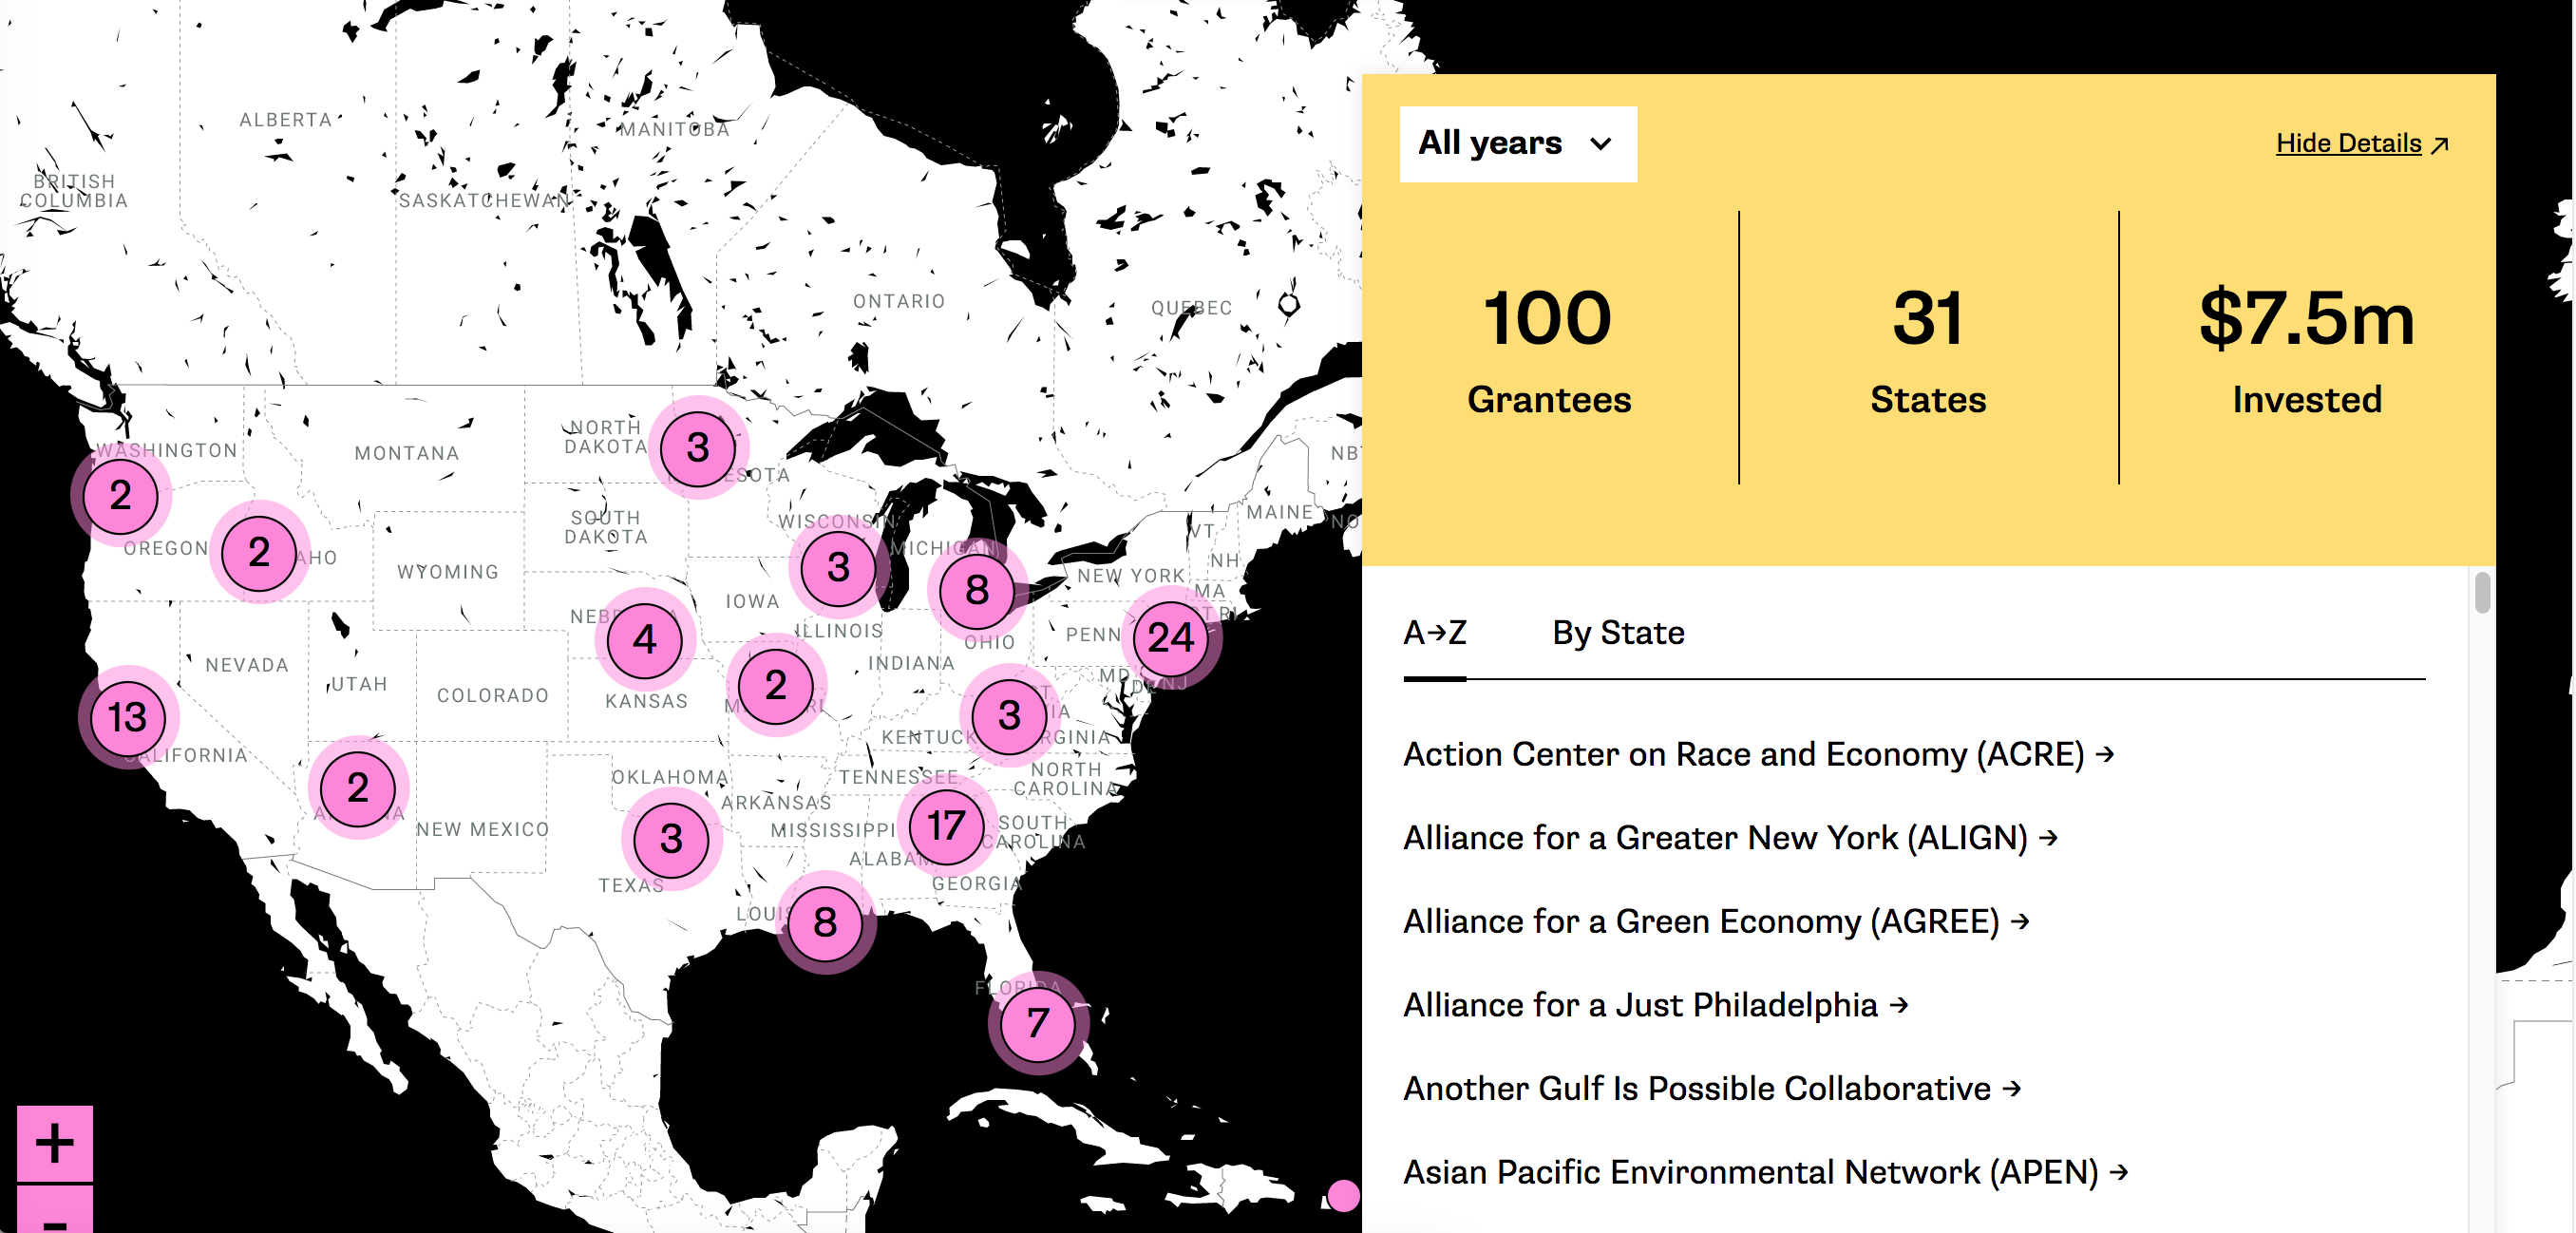 Image of an interactive map of the United States, with clickable areas, and filtering options.